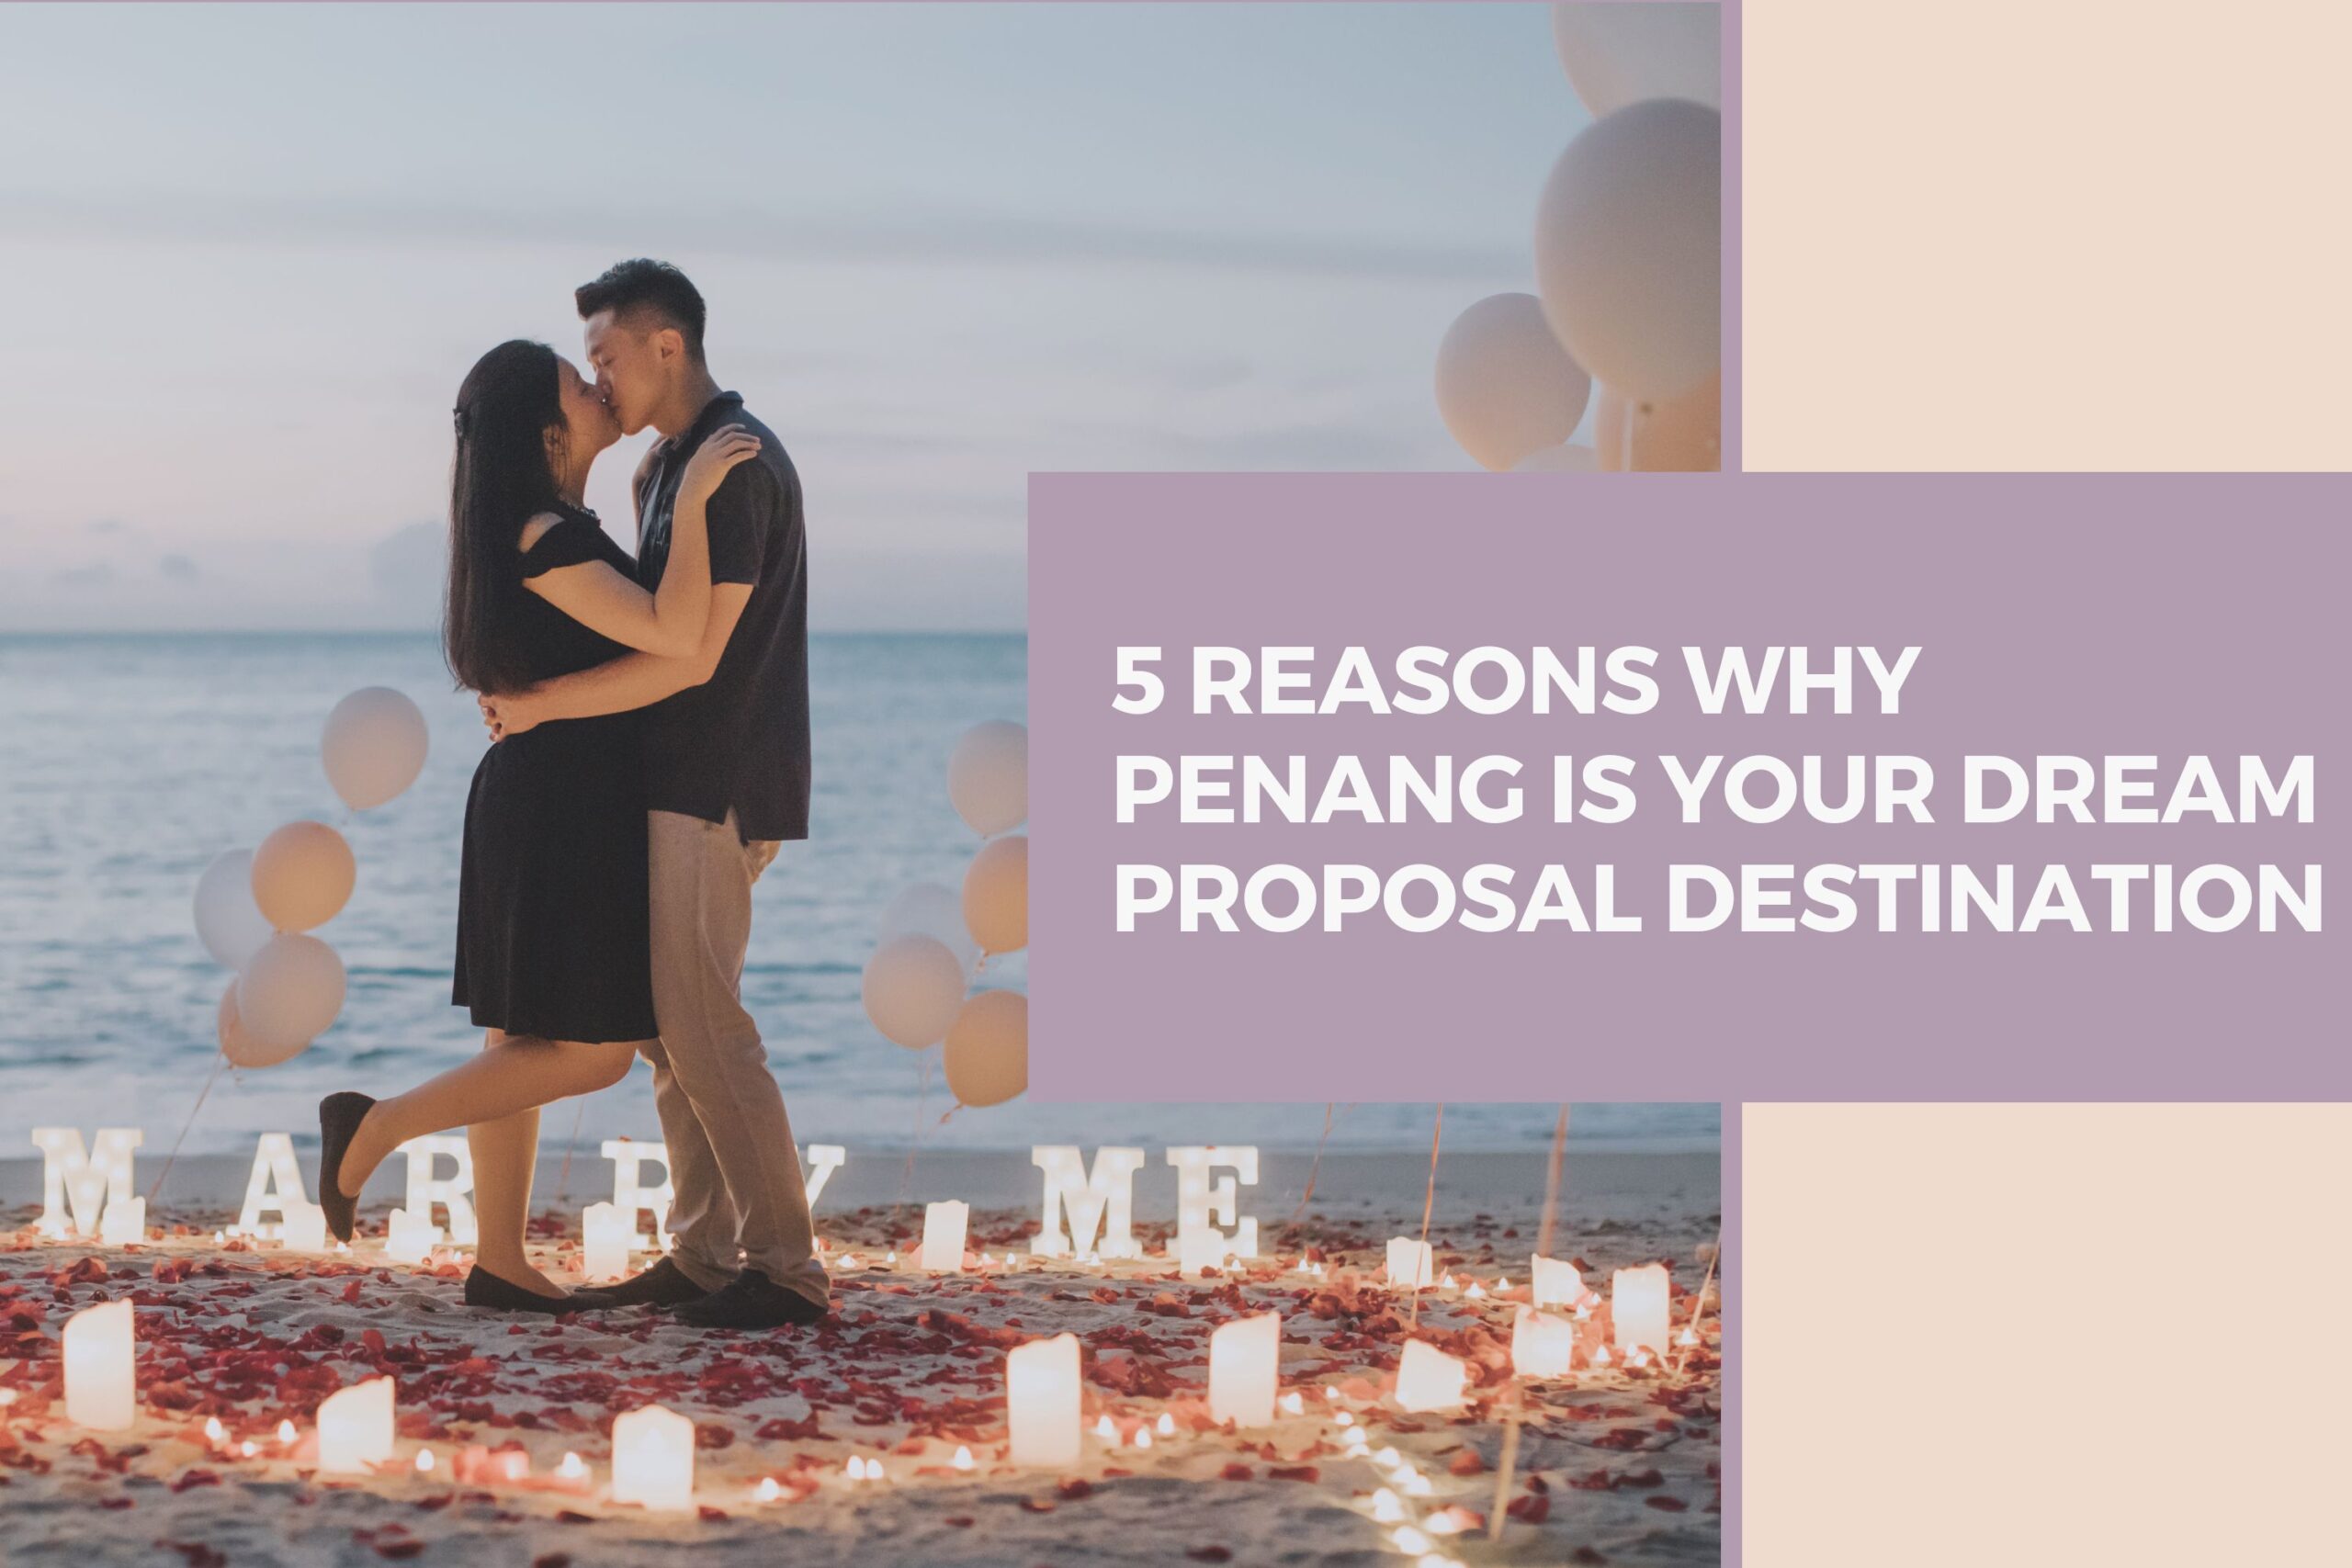 5 Reasons Why Penang is Your Dream Proposal Destination